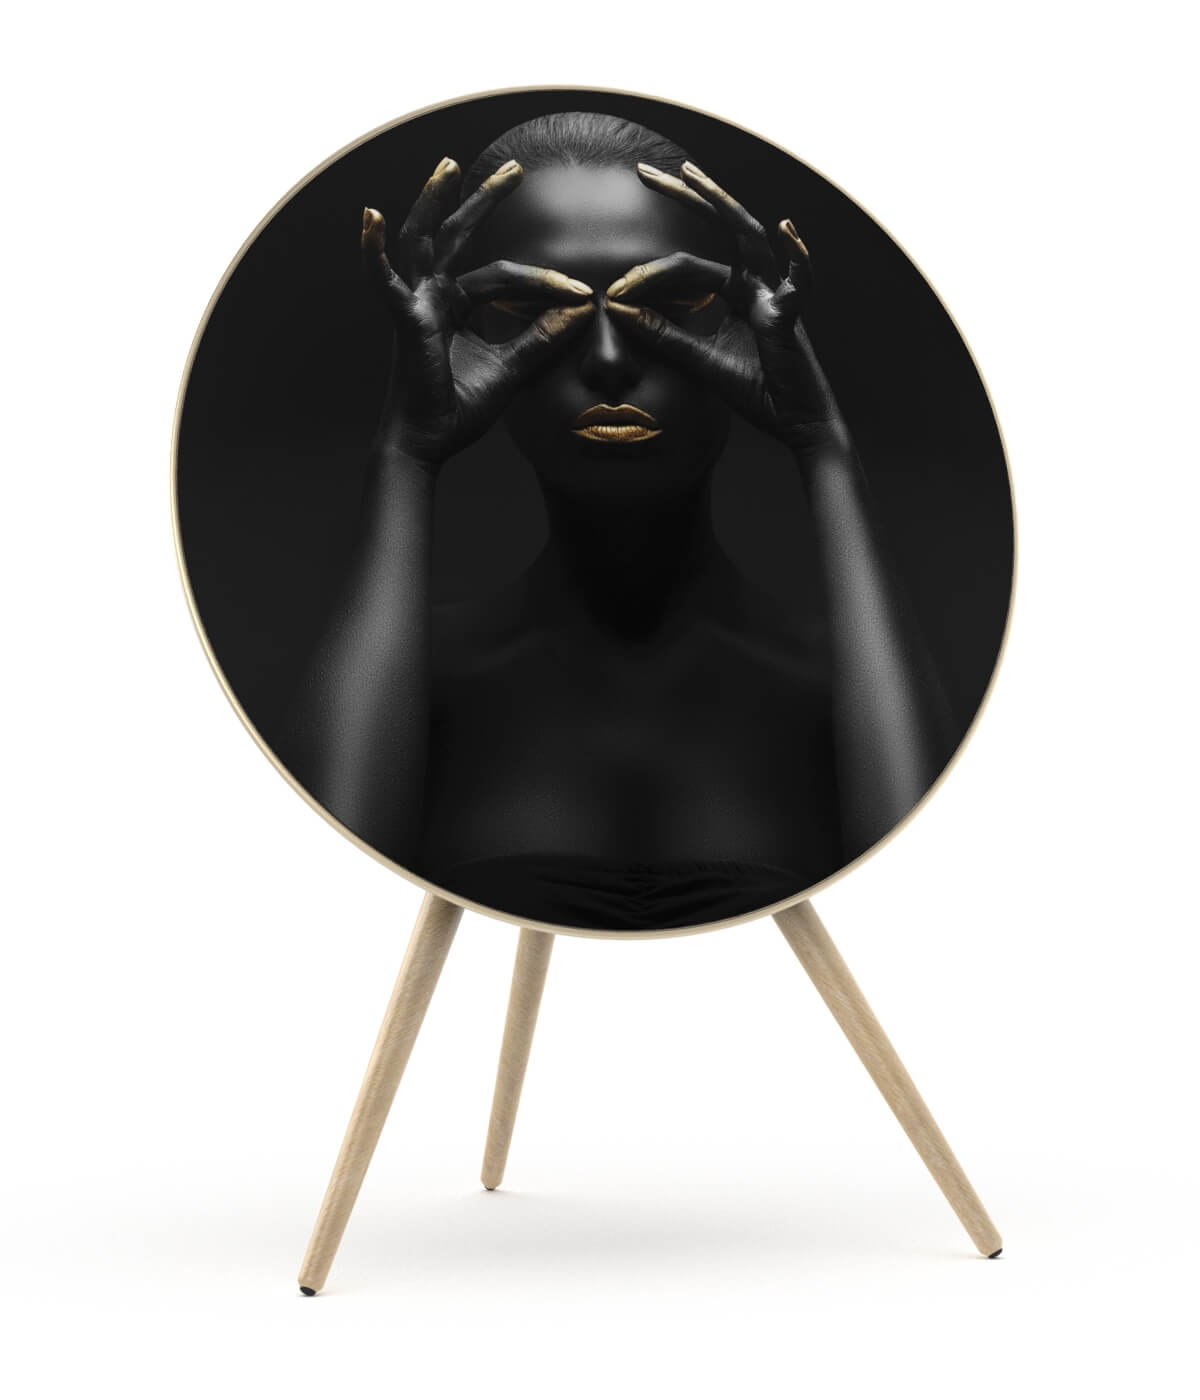 Skiniplay cover Golden Black for Bang & Olufsen Beoplay A9 and Beosound A9 speaker